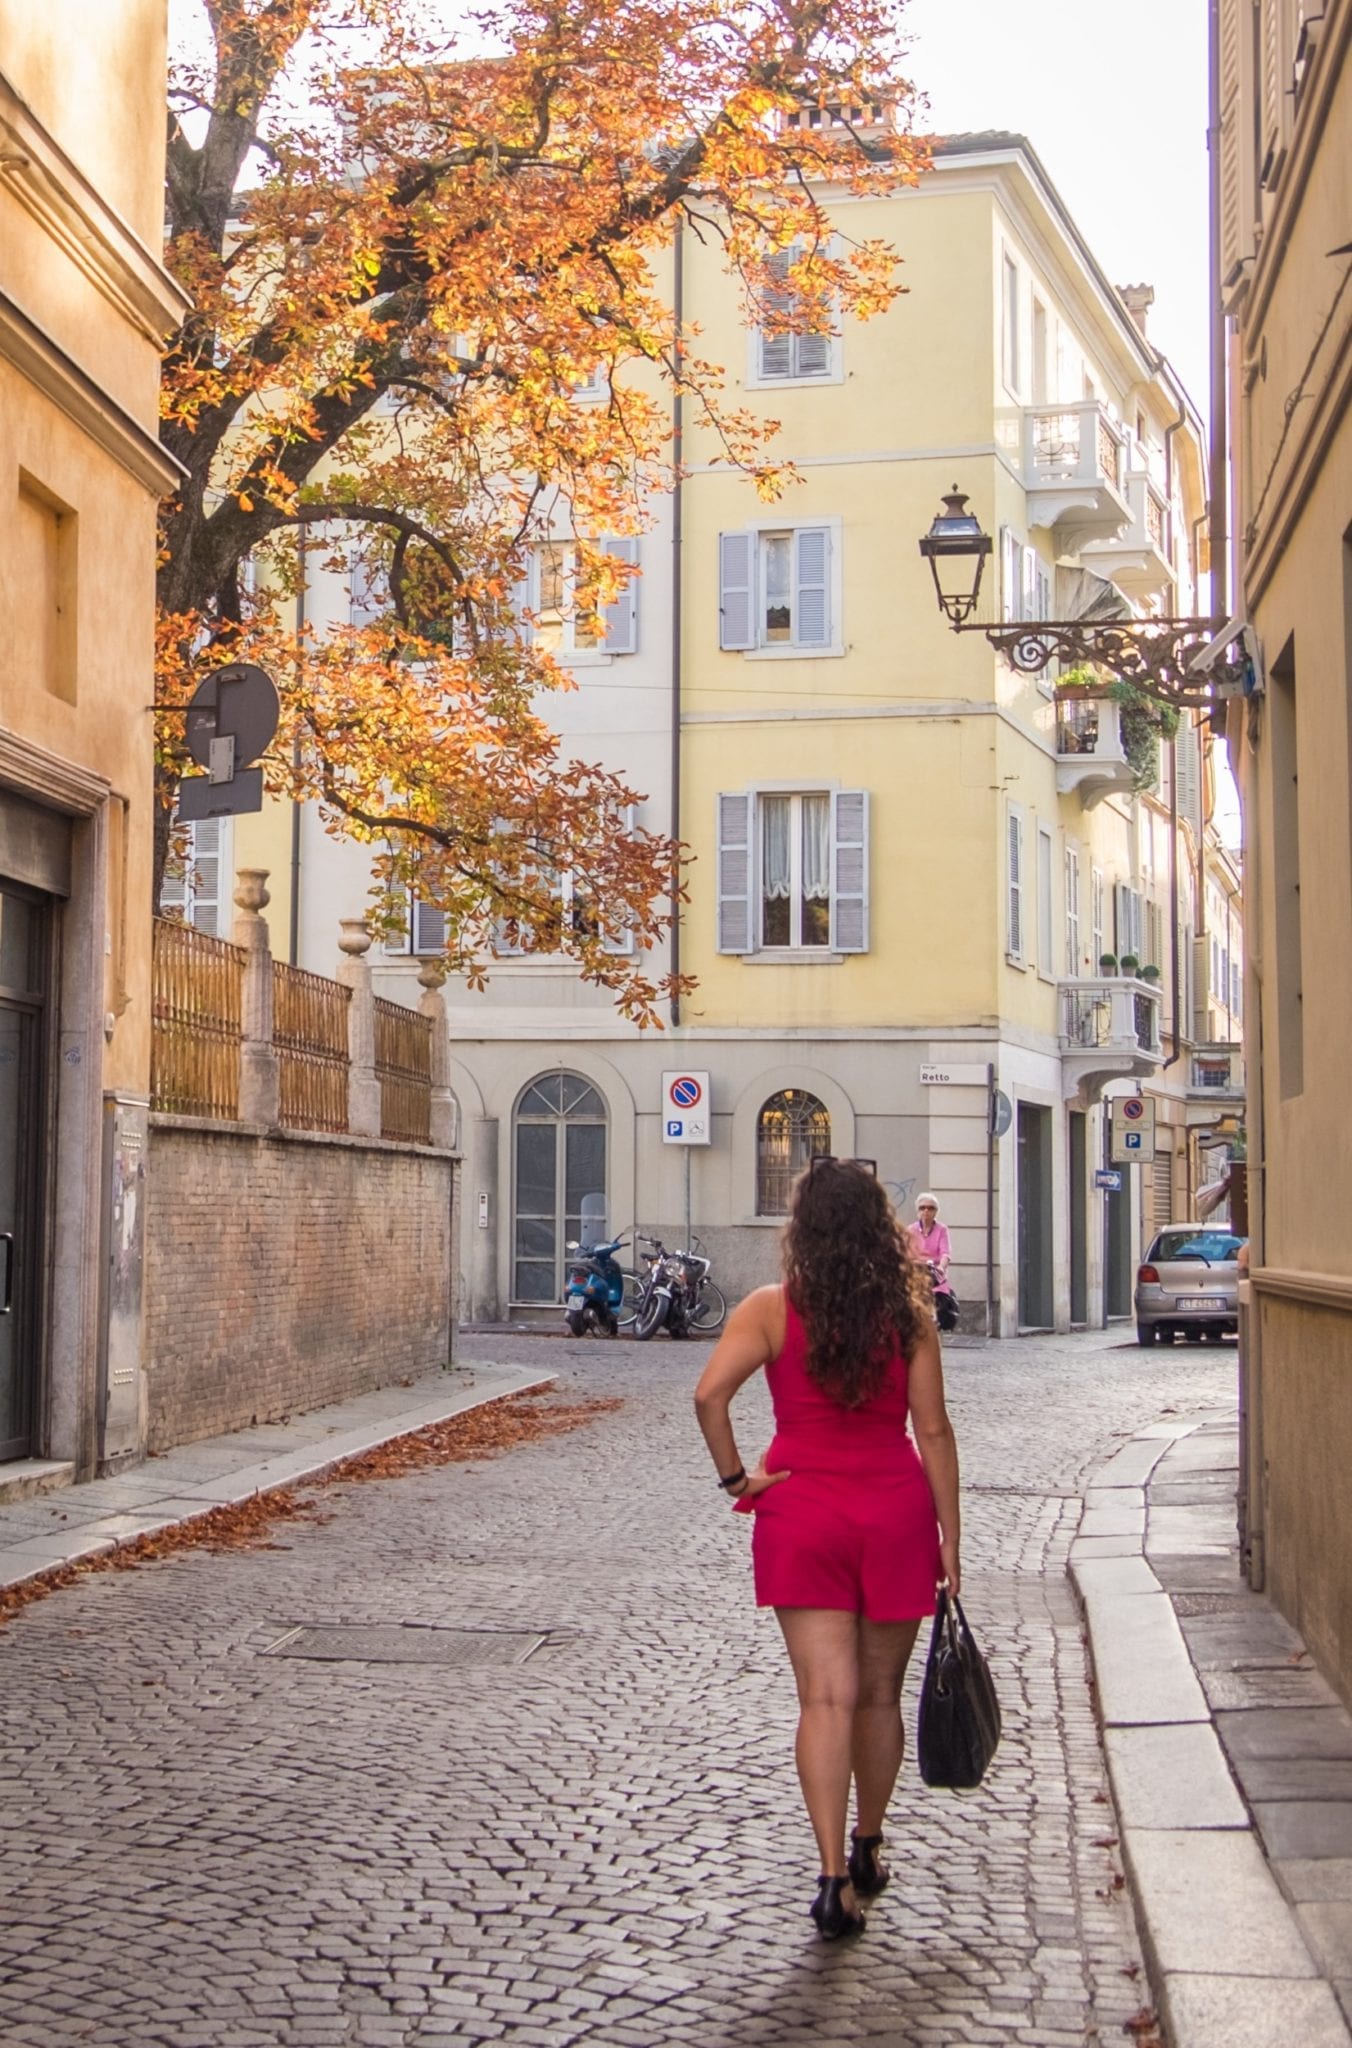 Kate wears a short hot pink romper and stands on a cobblestoned street in front of a yellow building and a tree with autumn leaves.